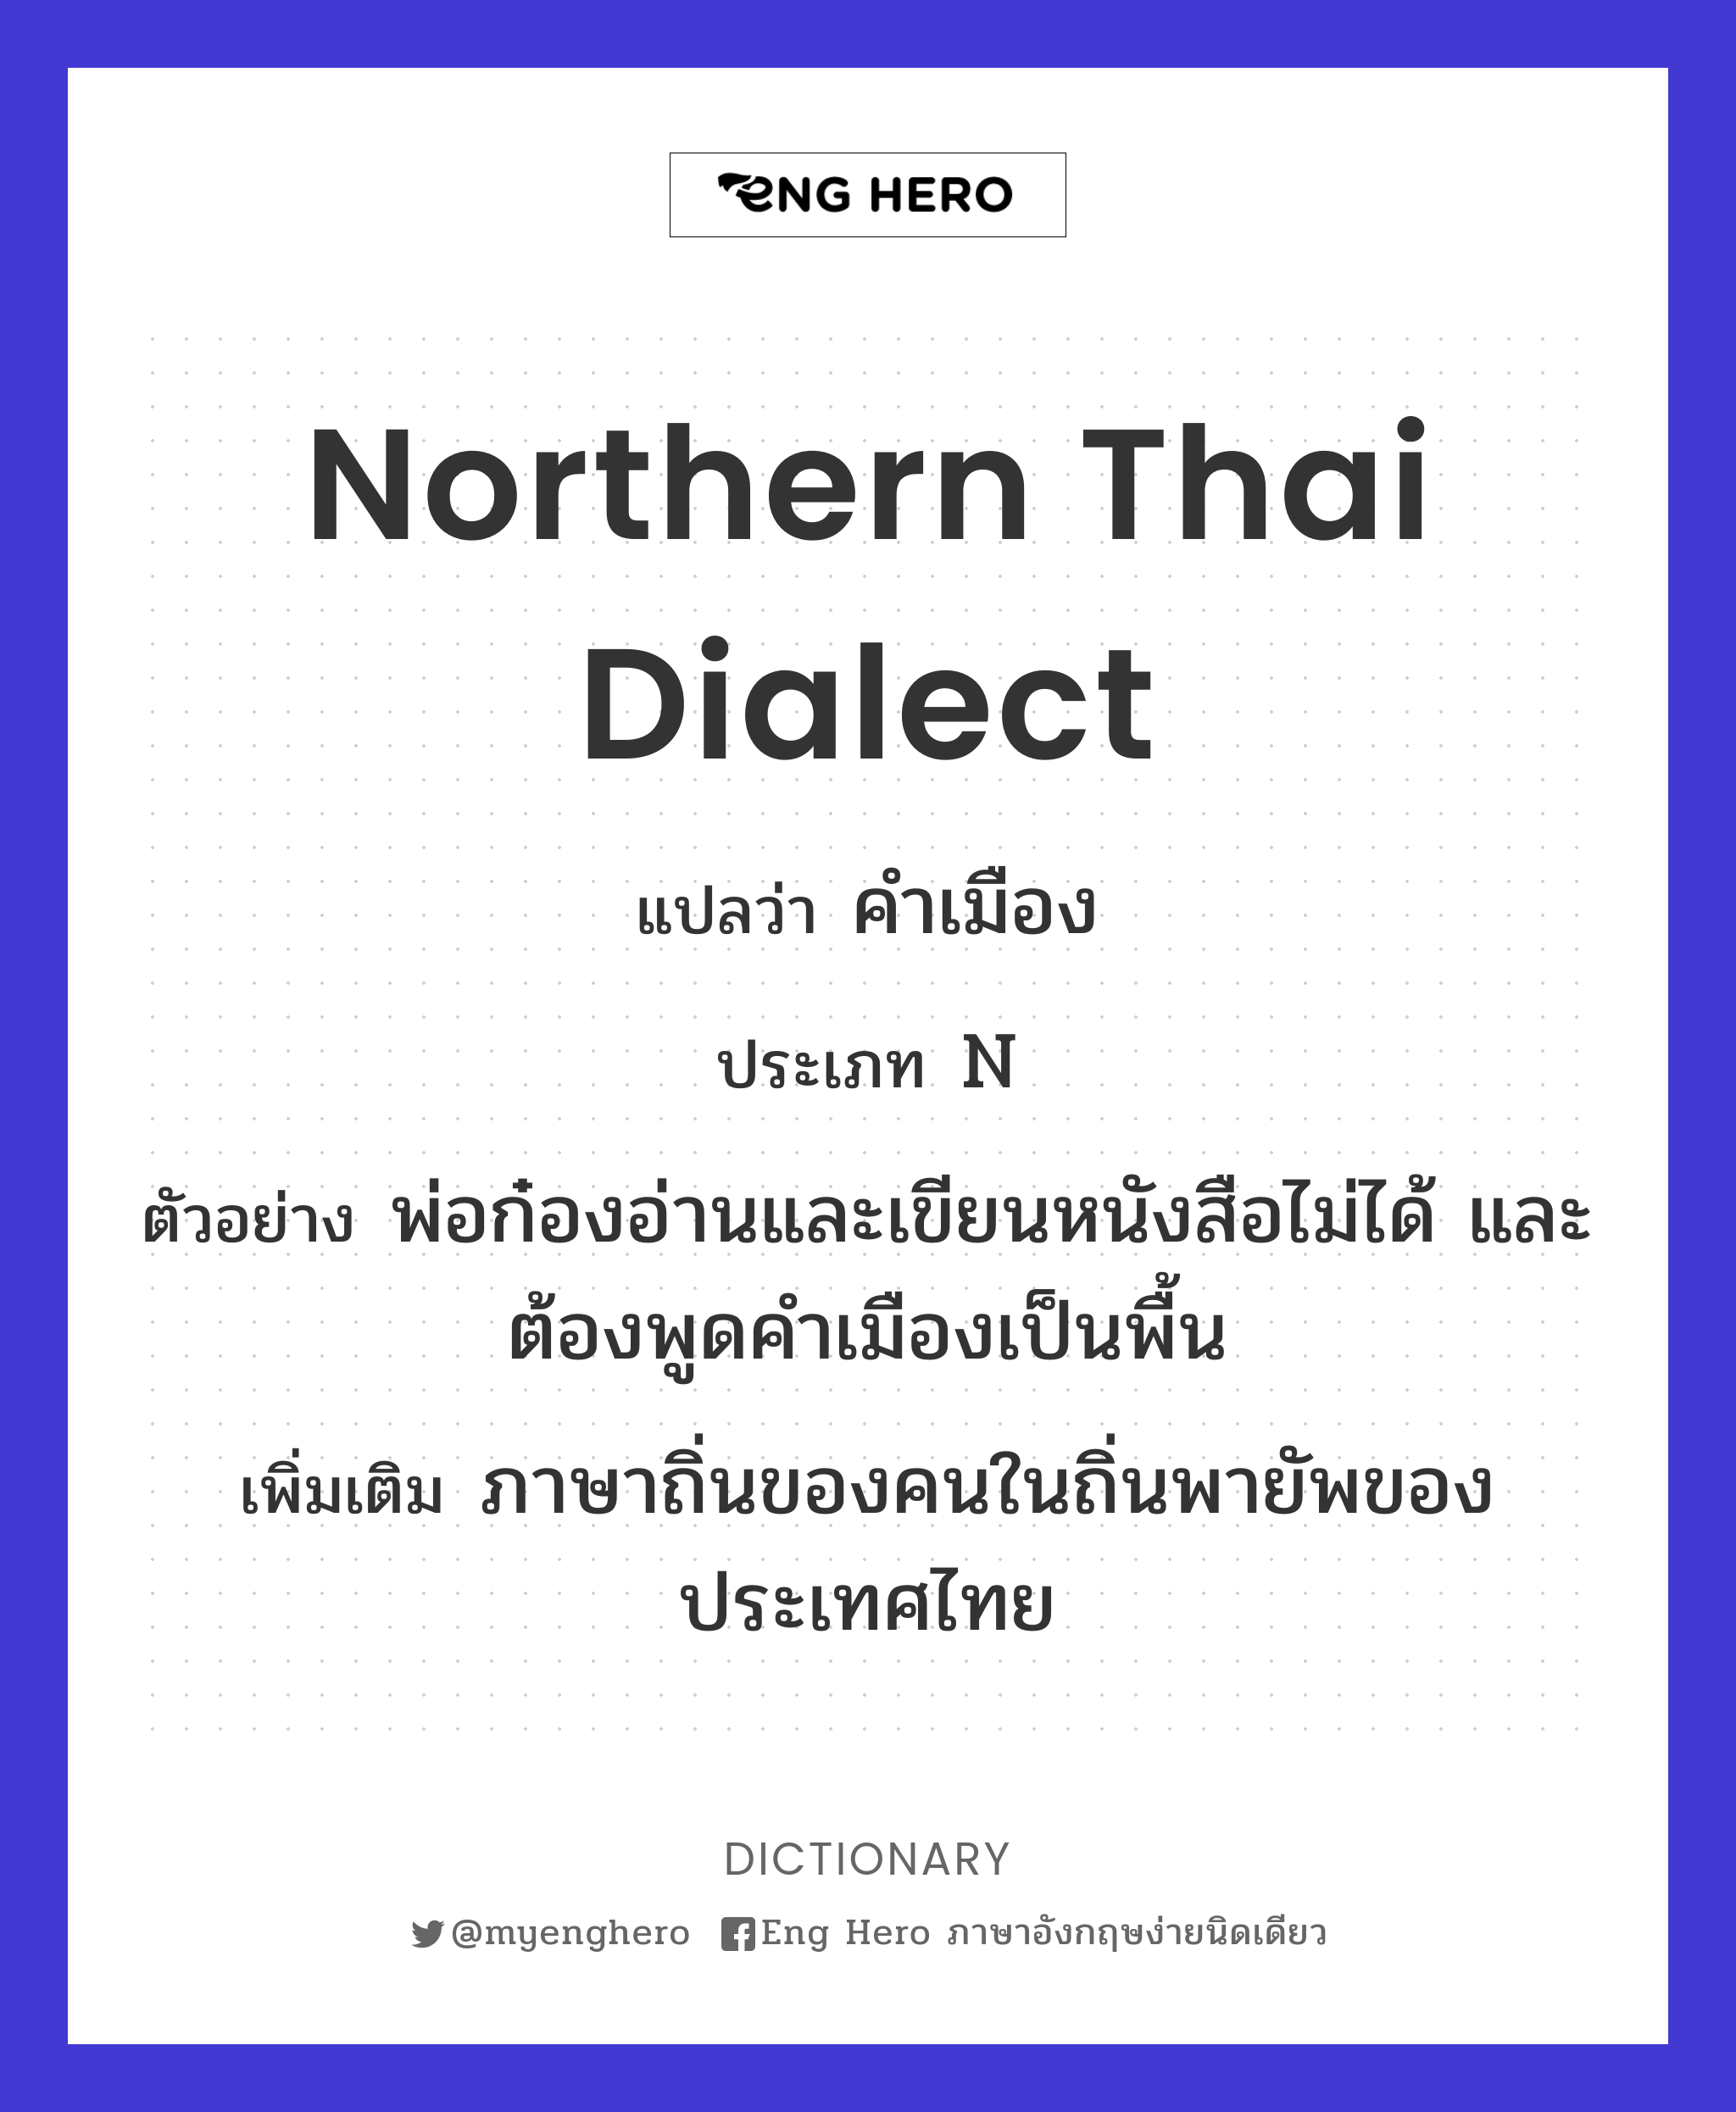 Northern Thai dialect